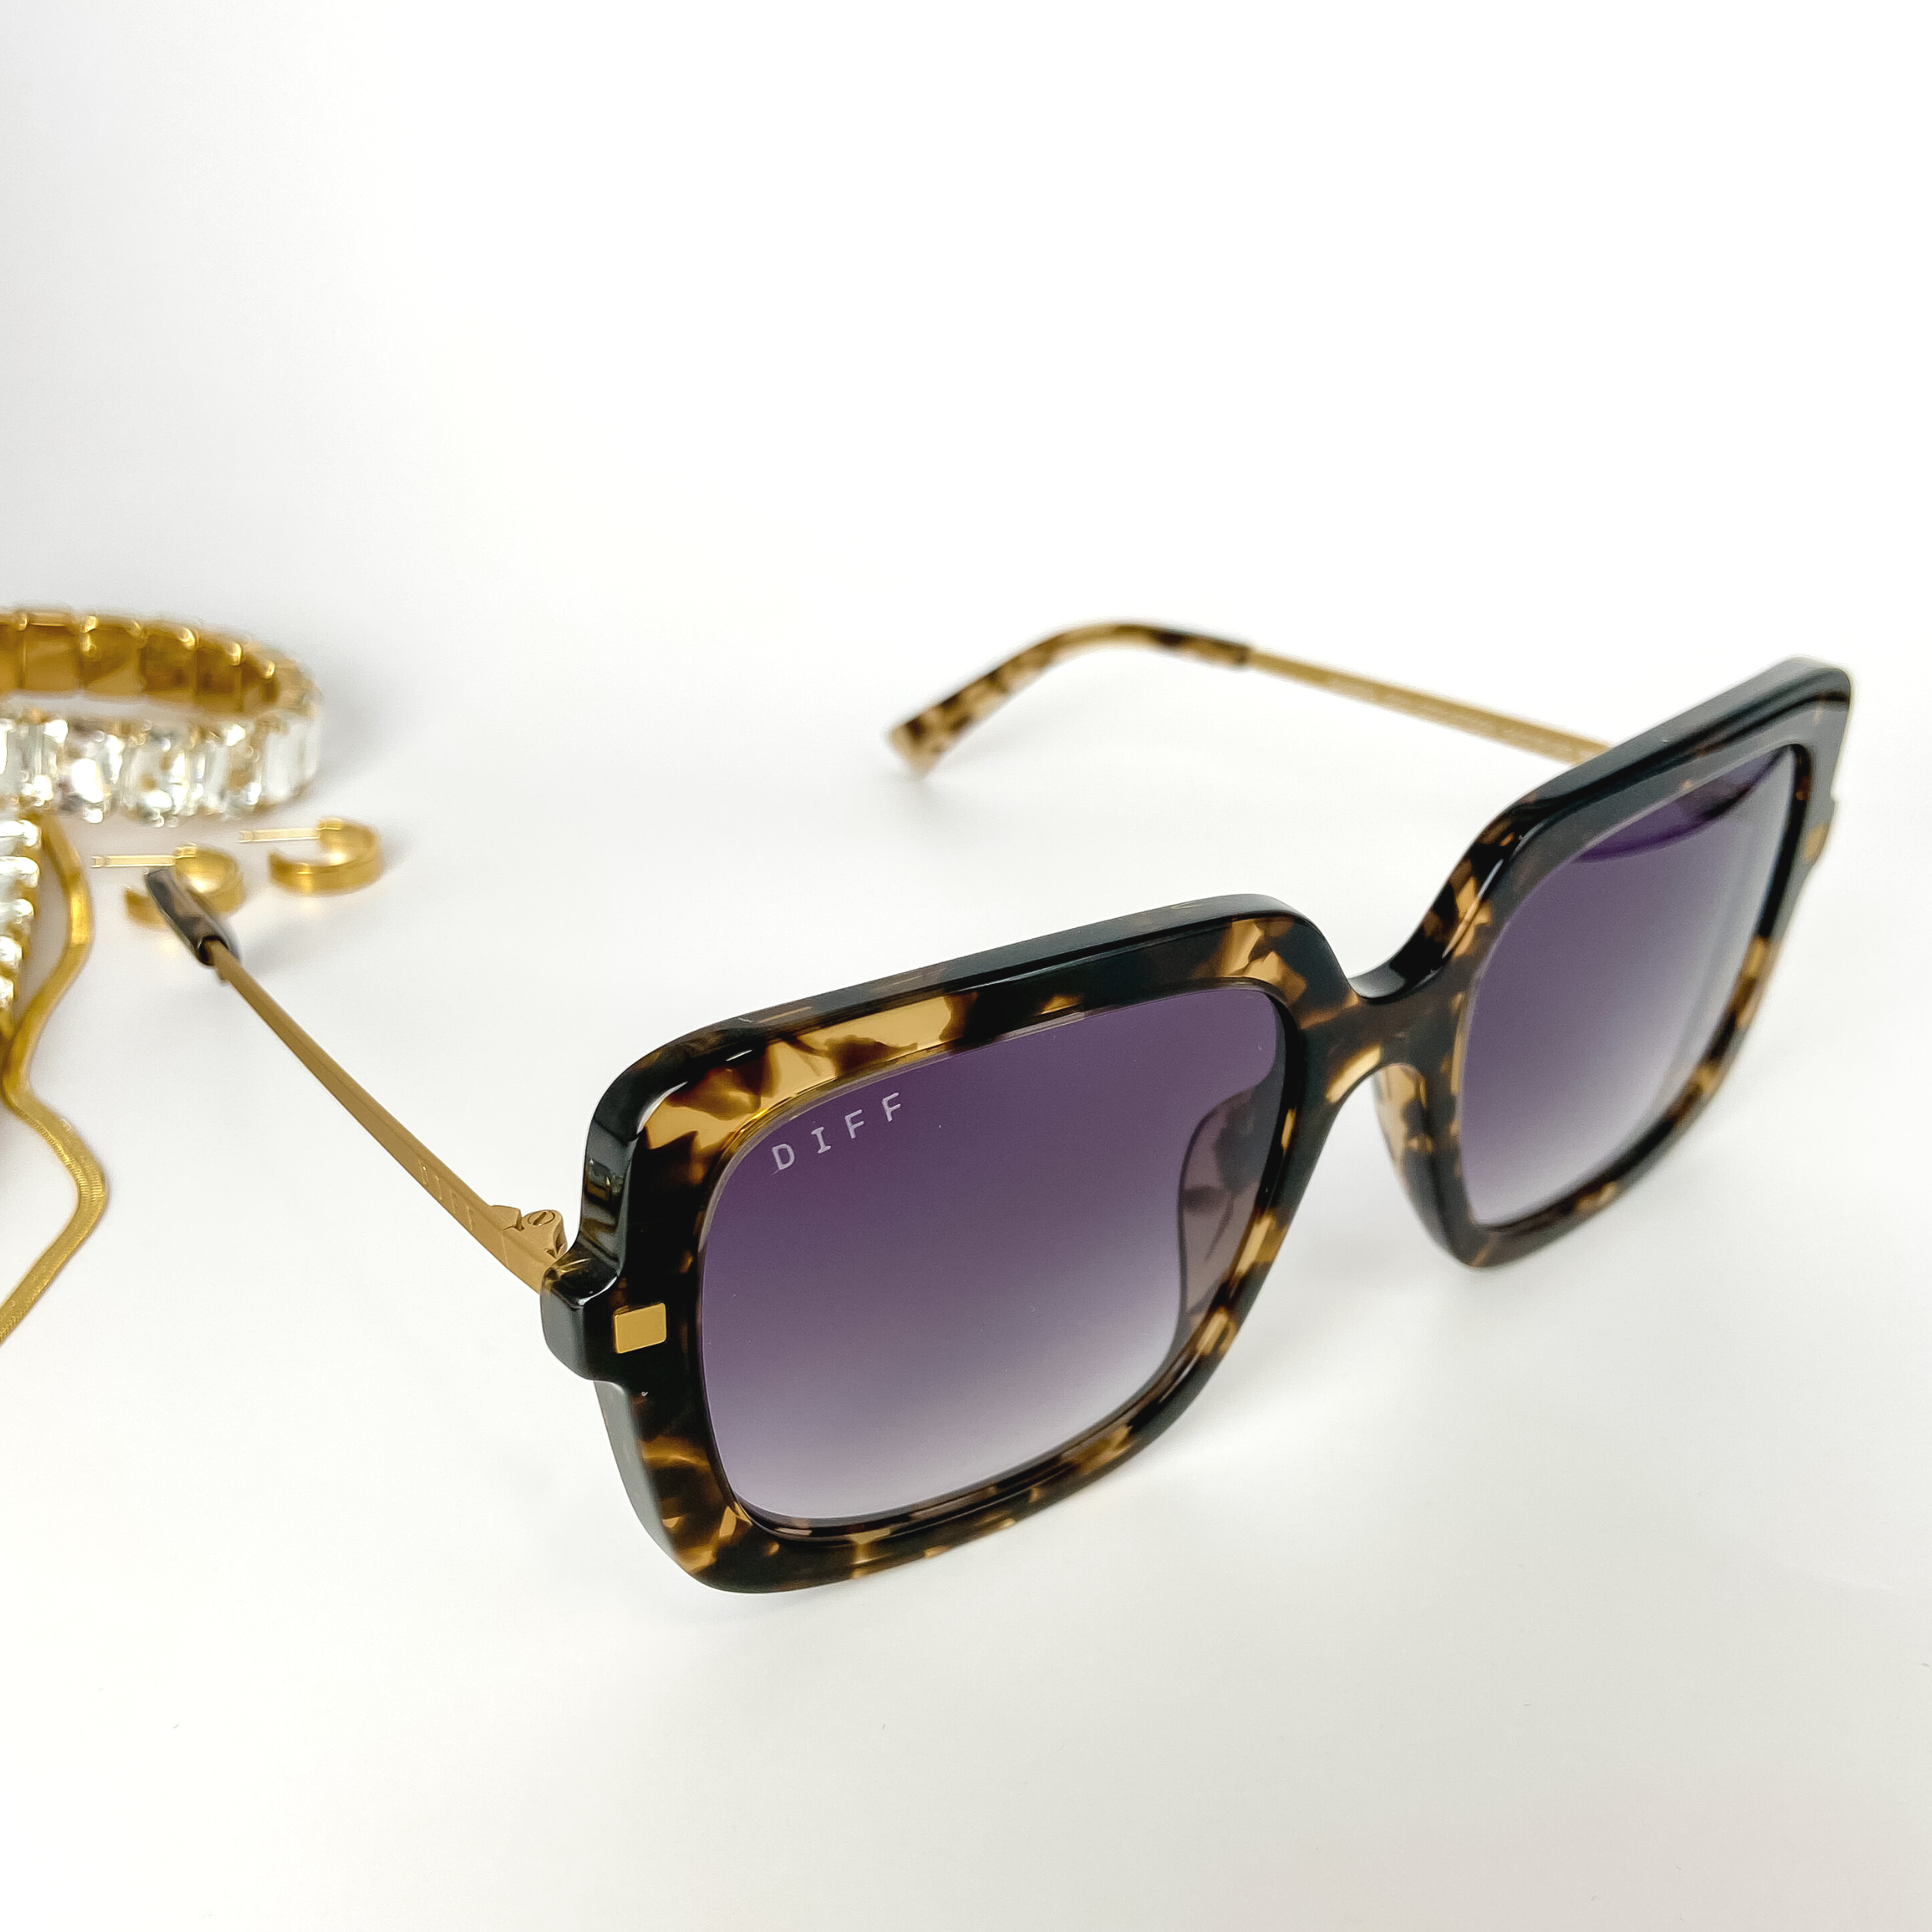 A pair of square tortoise-print sunglasses with gold tone trim and blue lenses. These sunglasses are pictured open on a white background with gold jewelry.